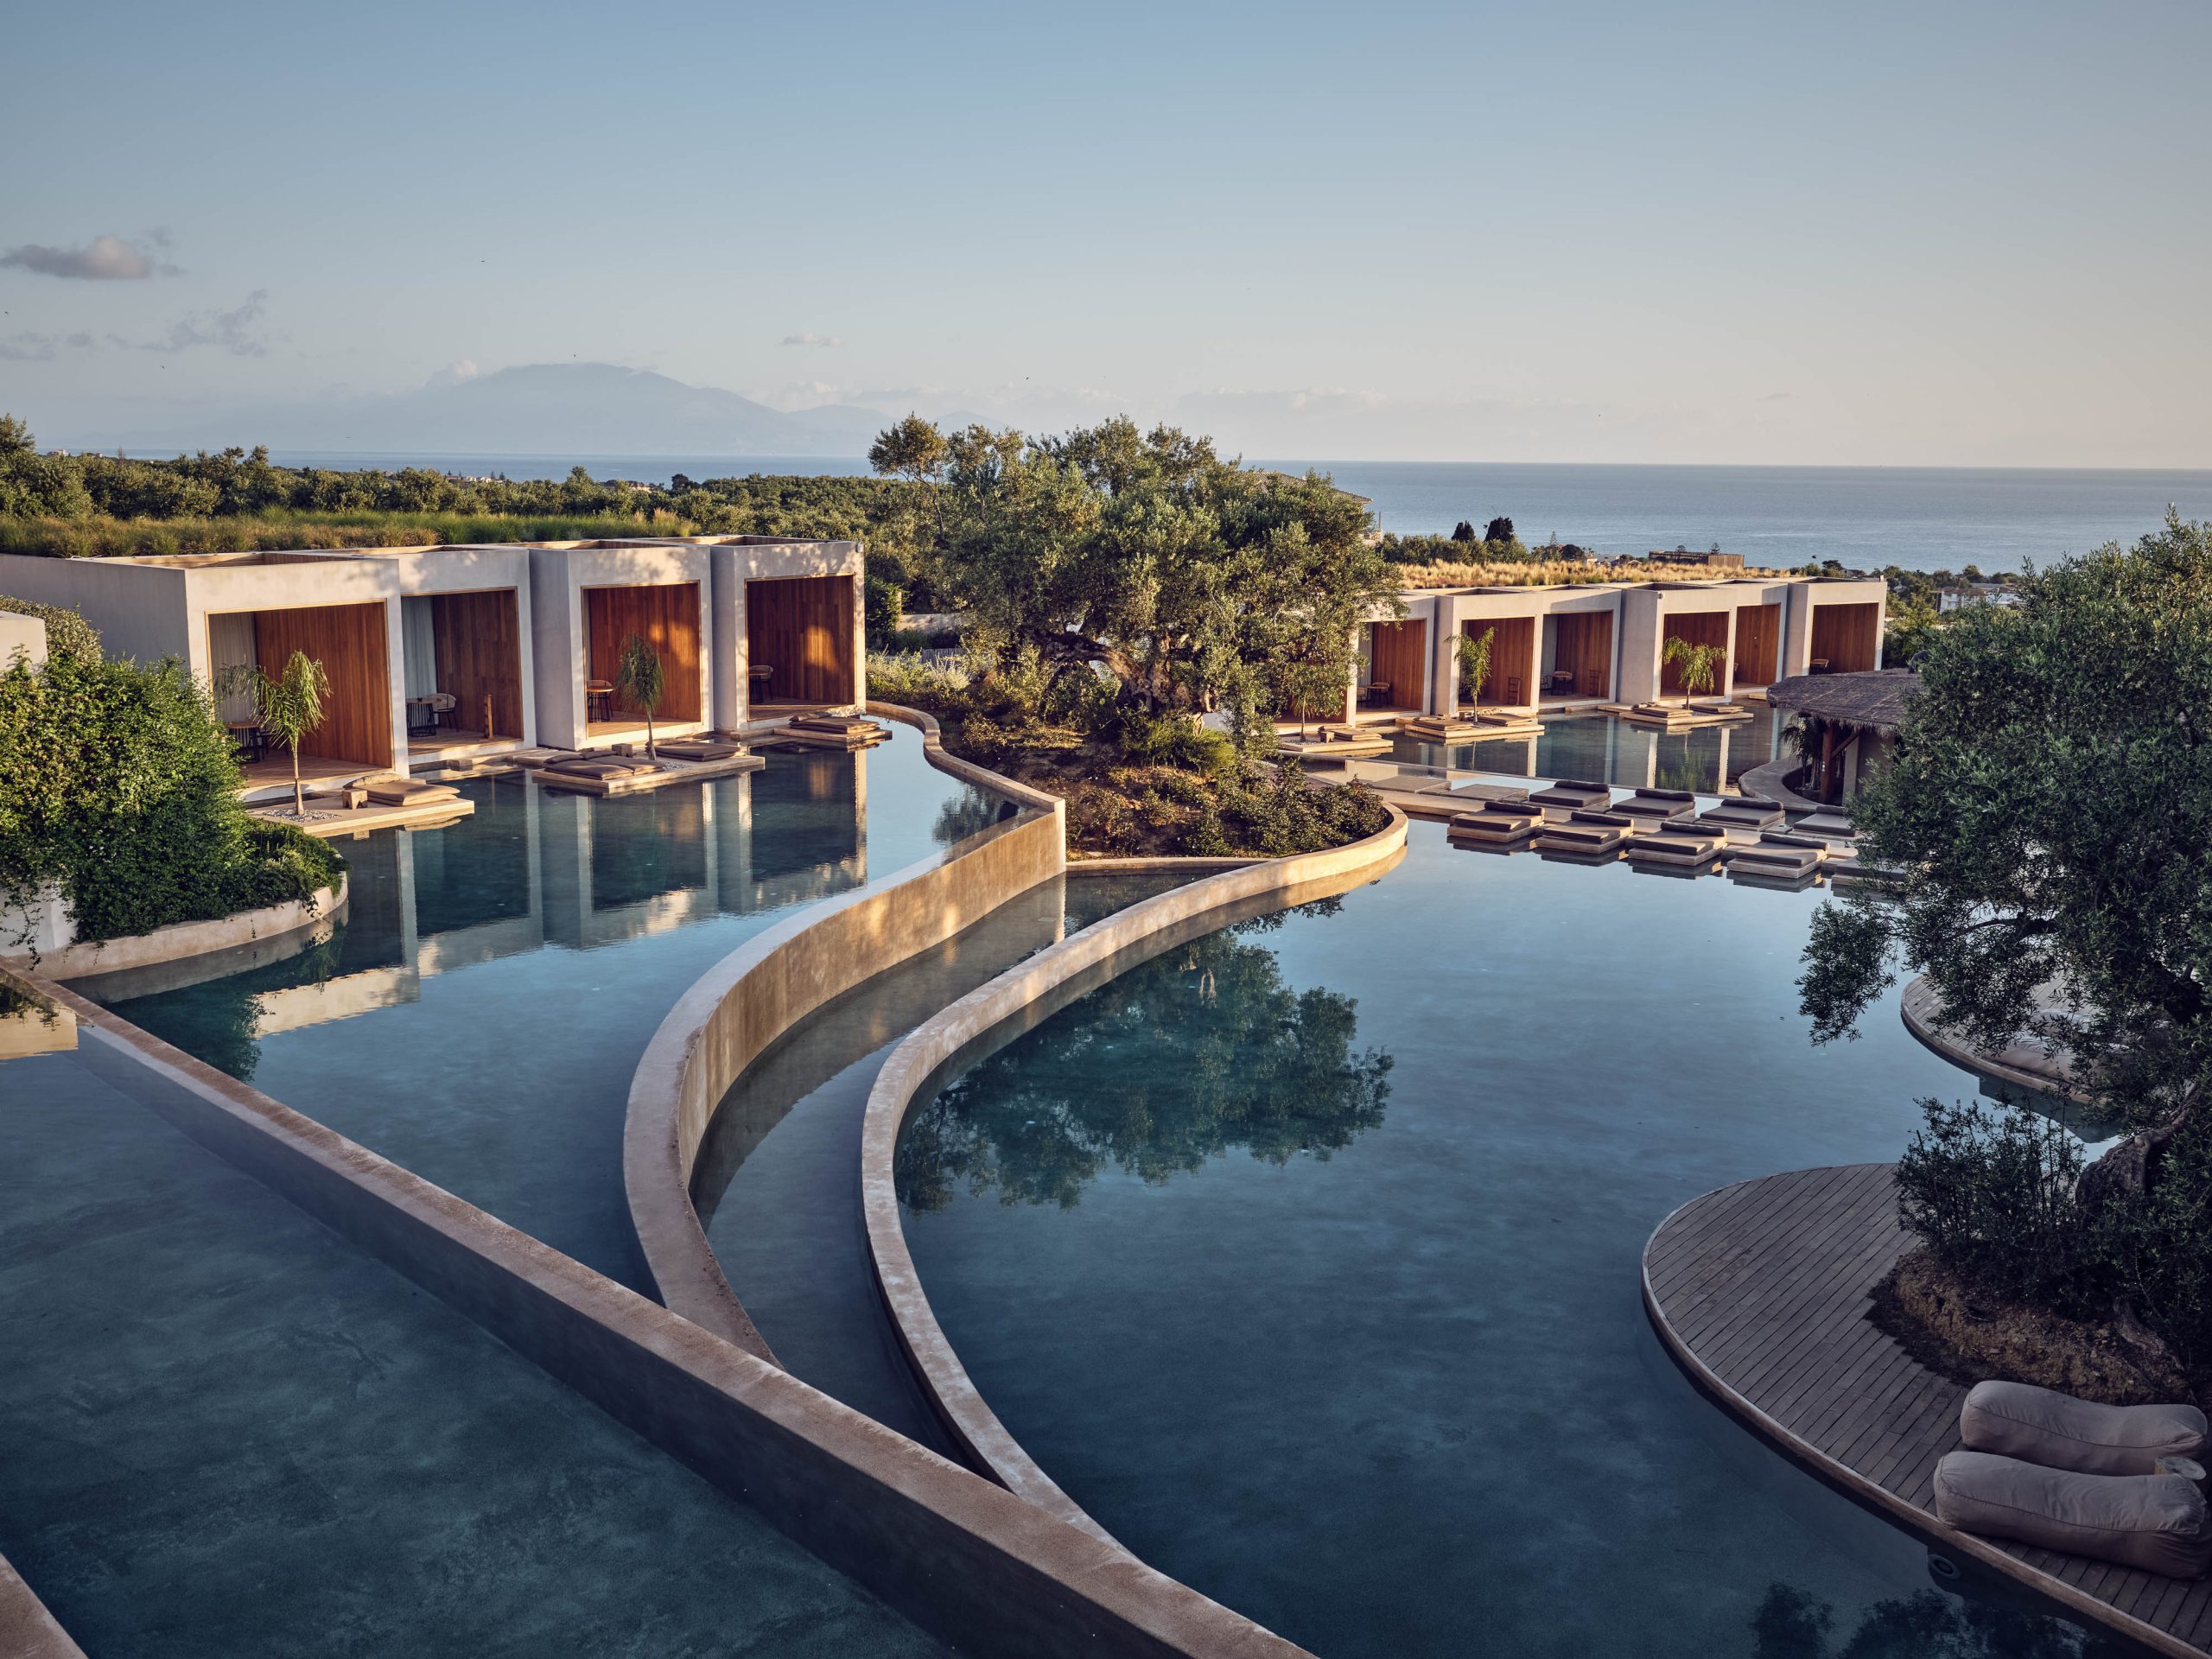 Xenos Hotels & Resorts: Συνεργασία με την SWOT Hospitality